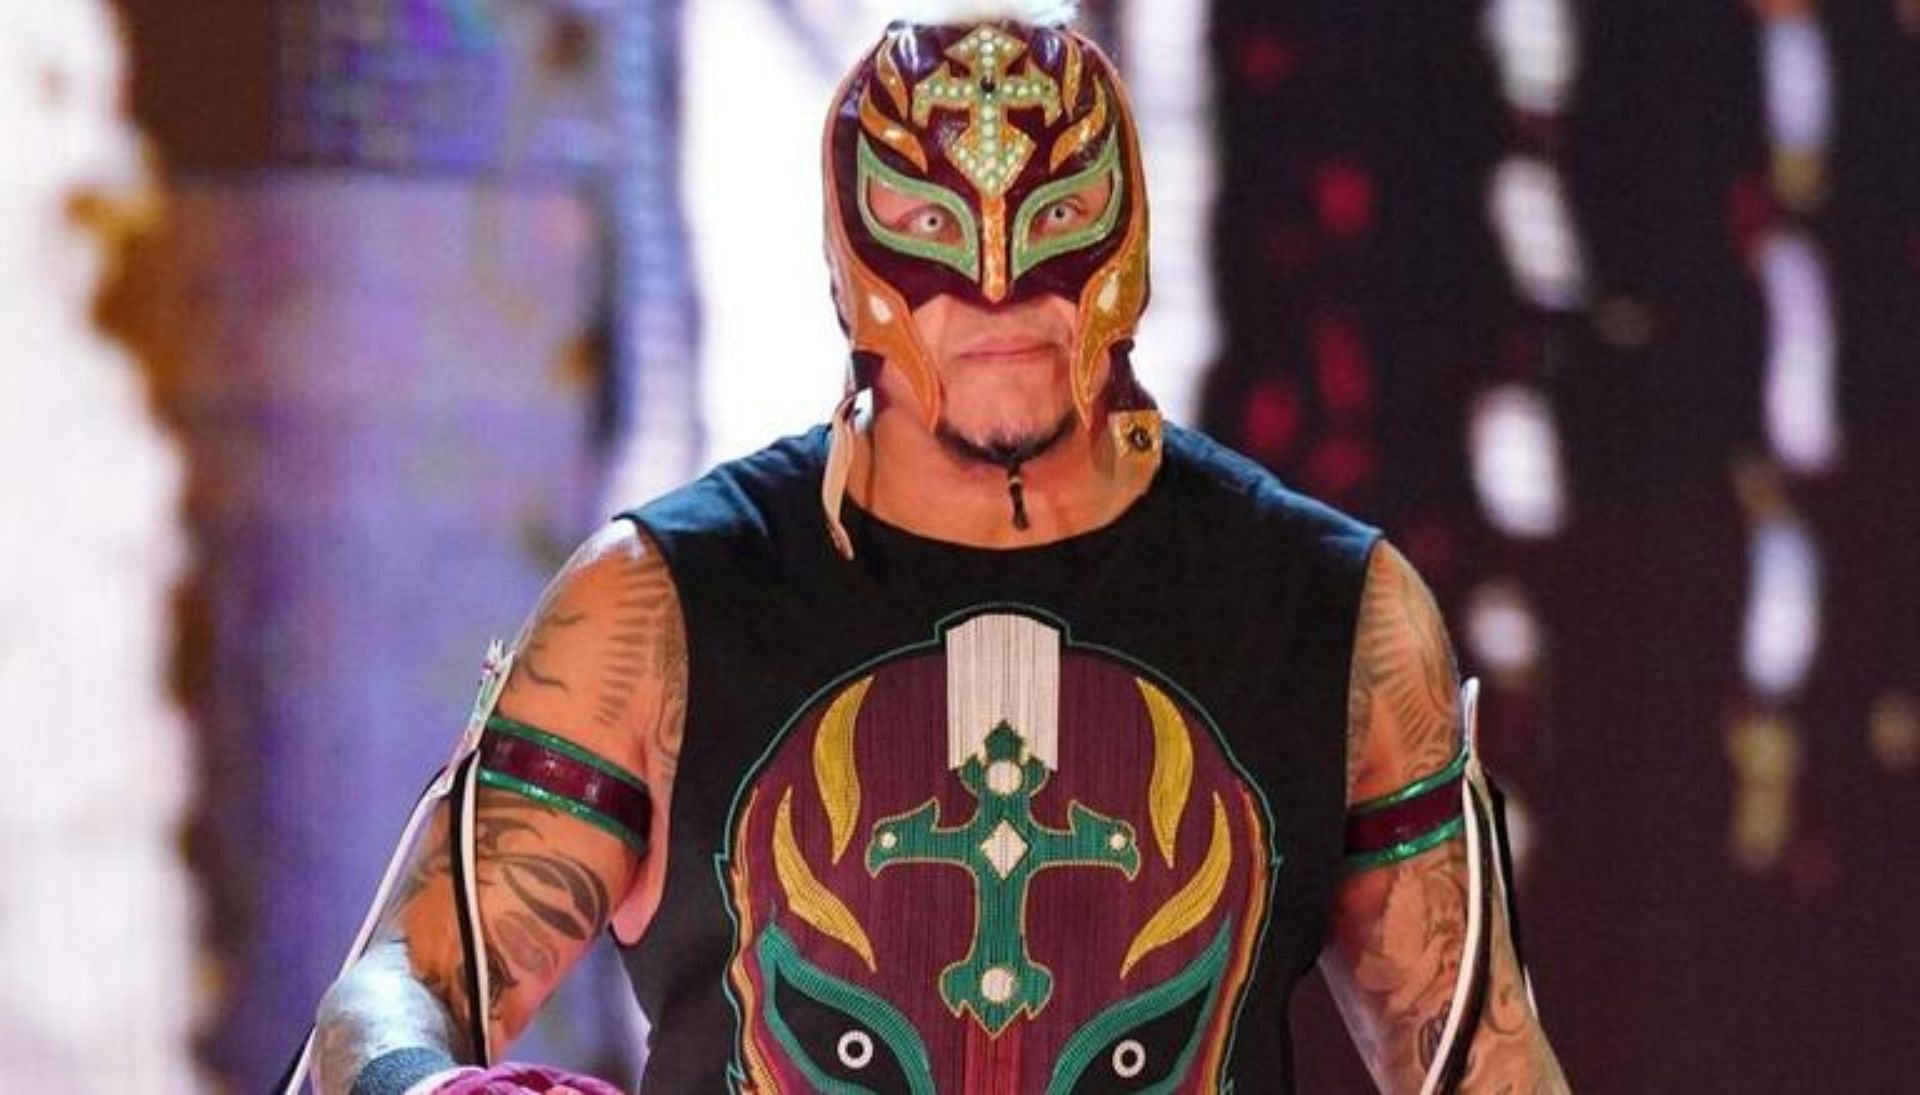 Rey Mysterio will be in action at Elimination Chamber 2022